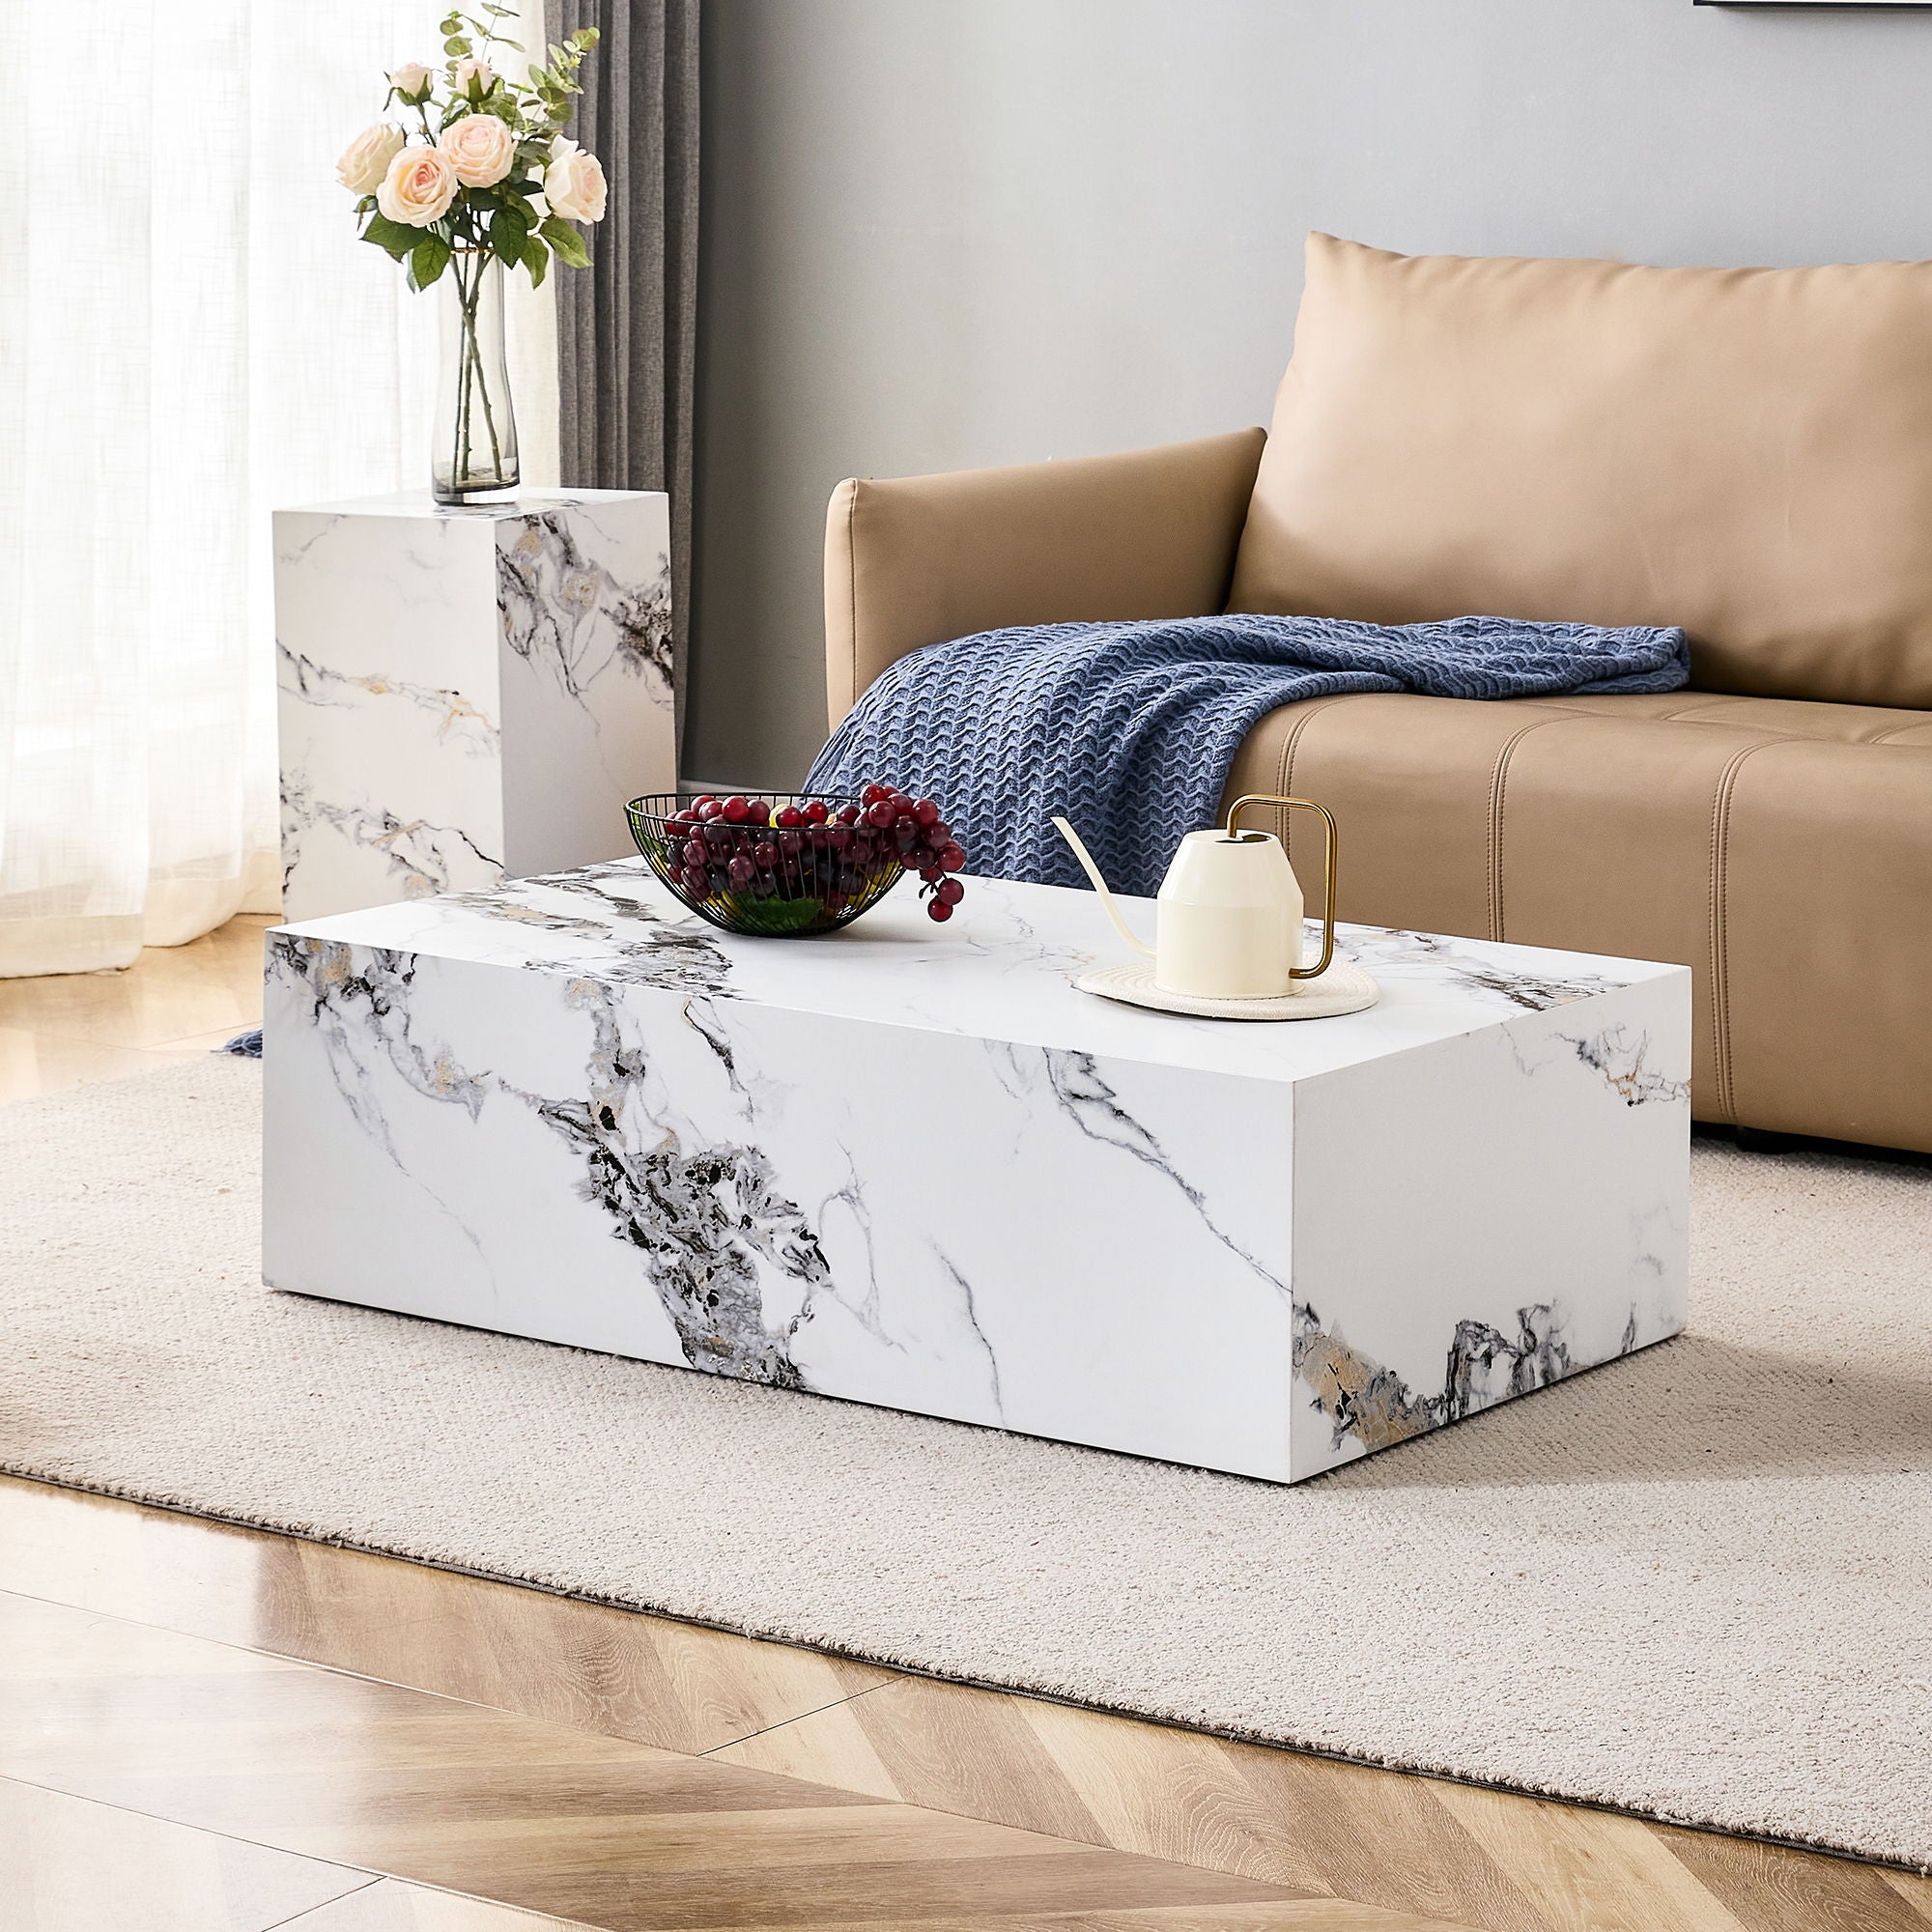 Modern MDF Coffee Table With Marble Pattern - 39.37X23.62X11.81 Inches - Stylish And Durable Design